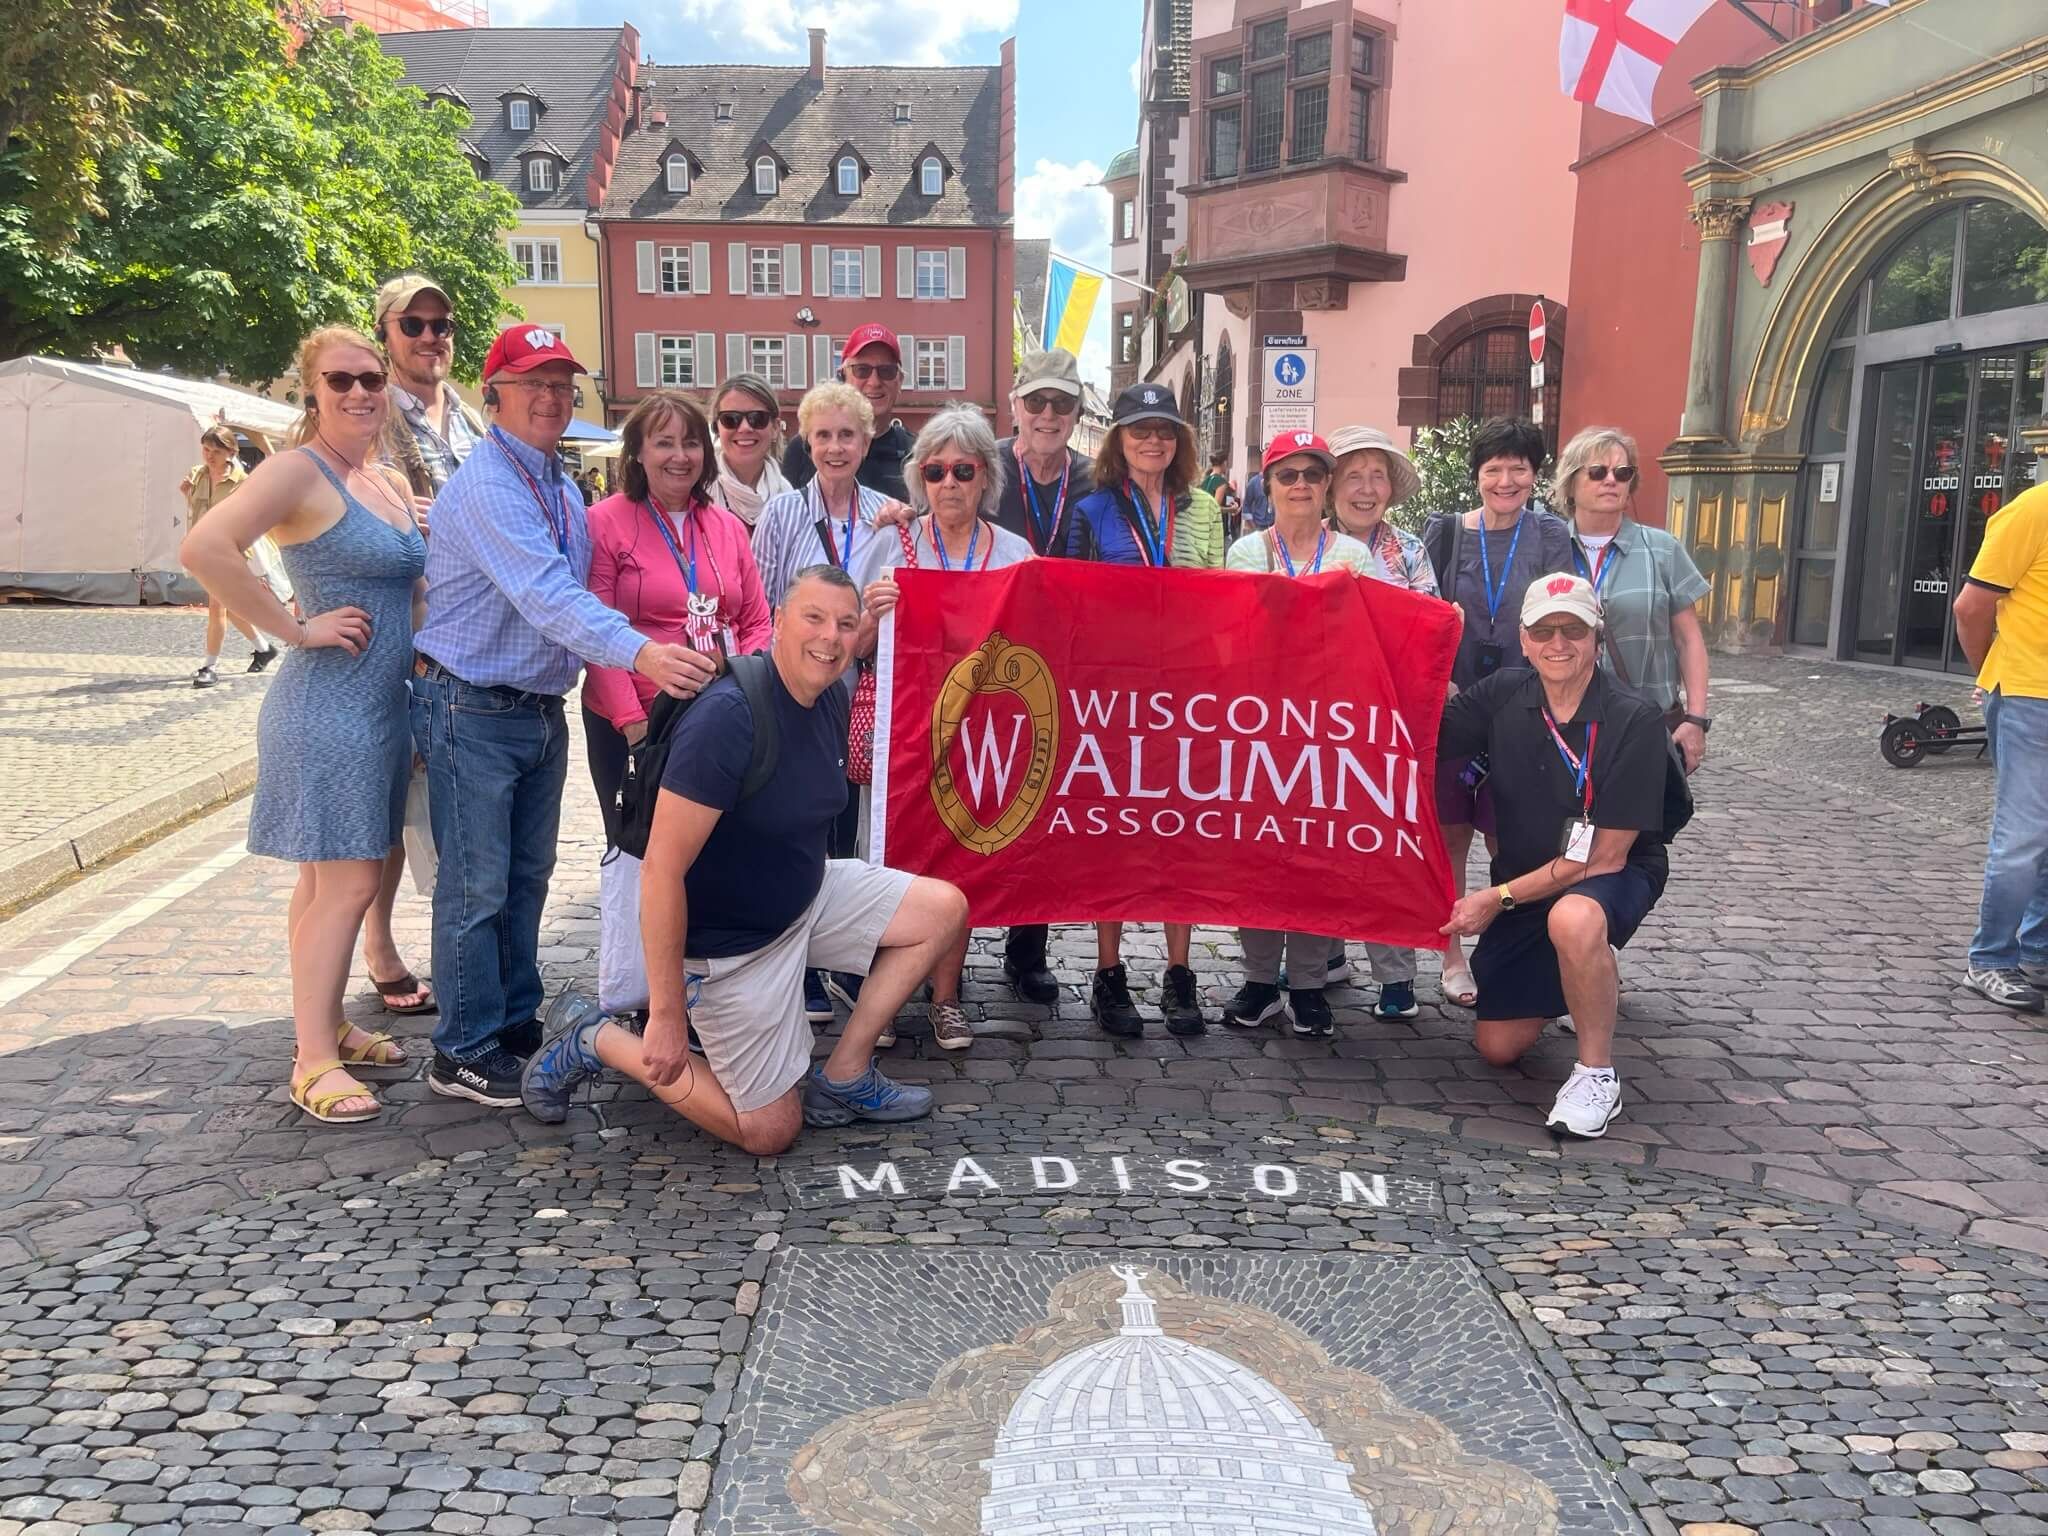 A group of tourists gather around a red flag that reads "Wisconsin Alumni Association" on a cobblestone plaza that features a mosaic of a white capitol dome under the word "Madison."